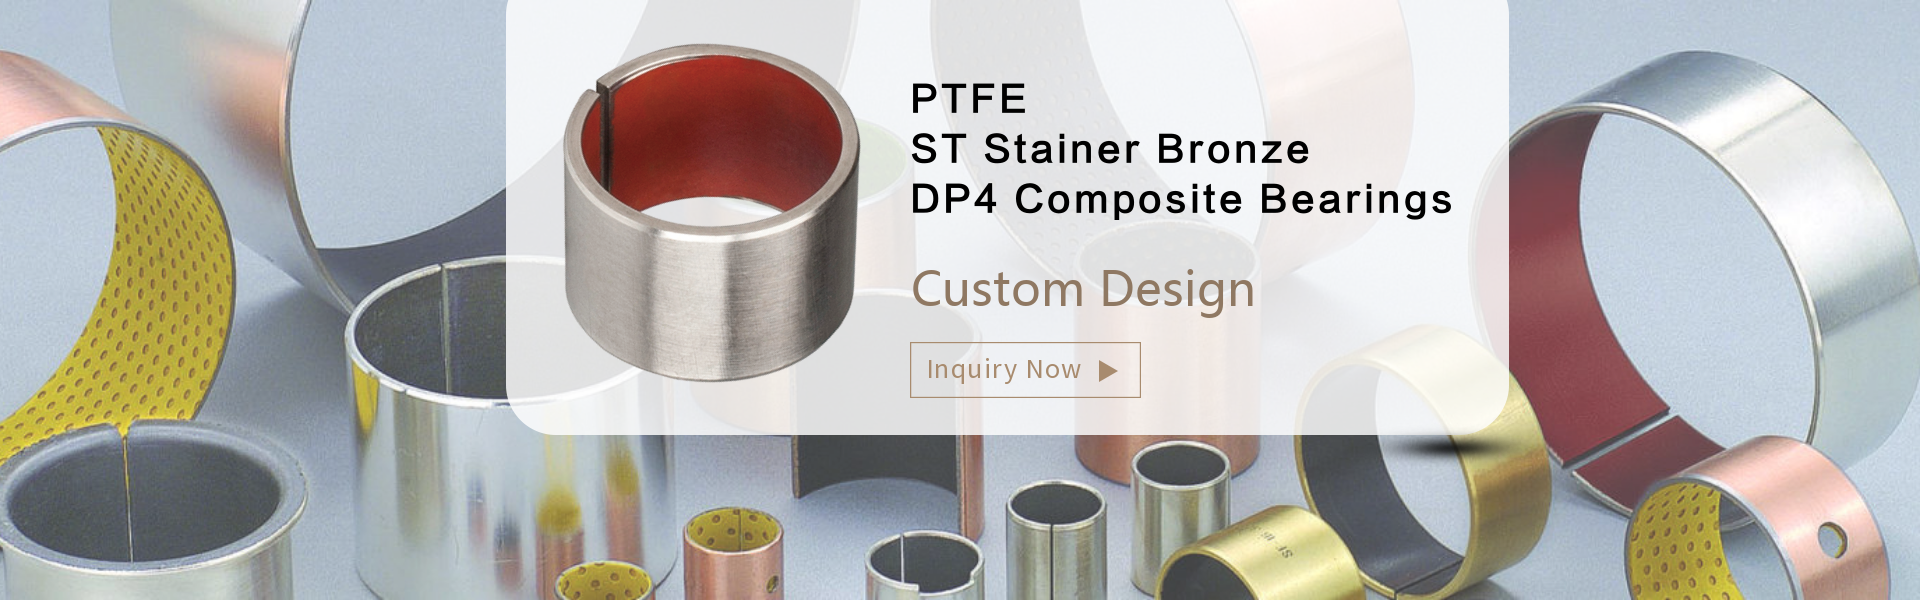 ST Stainer Bronze PTFE DP4 Bushing